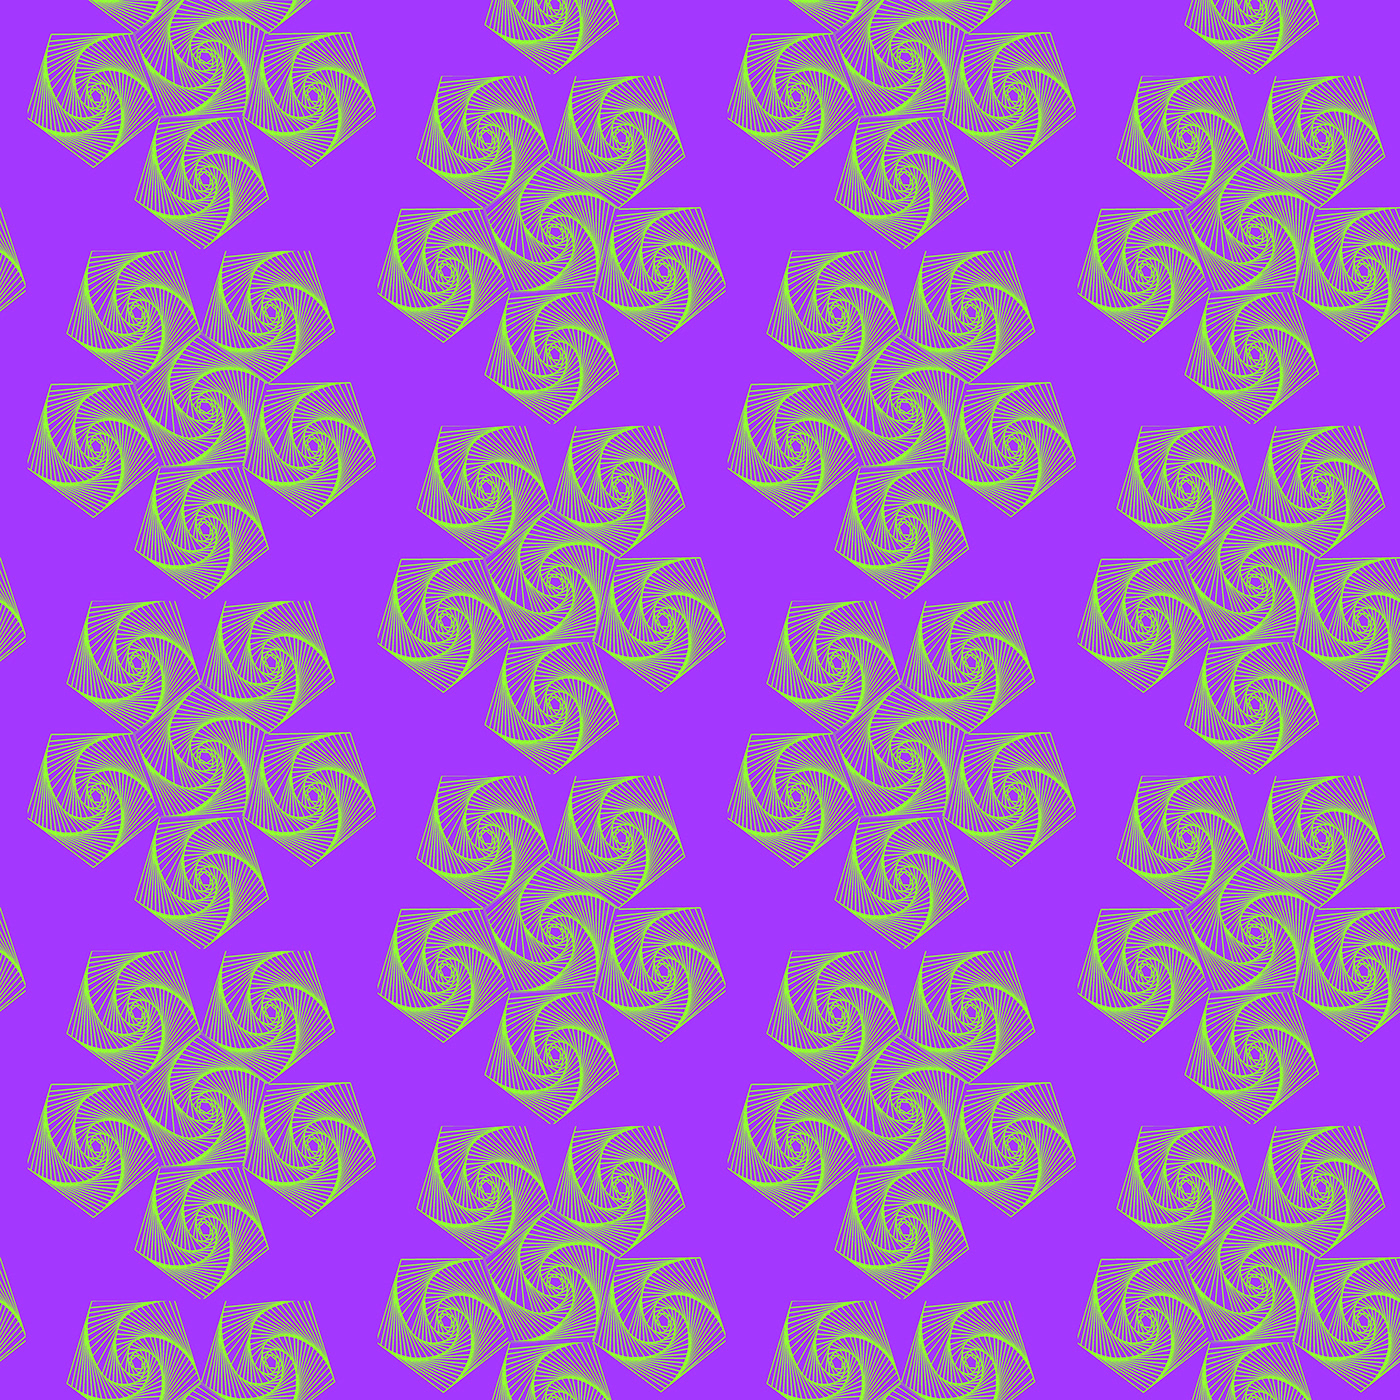 vectorart Wallpapers backgrounds lace pentagon lilac fantasy geometric Flowers seamless patterns